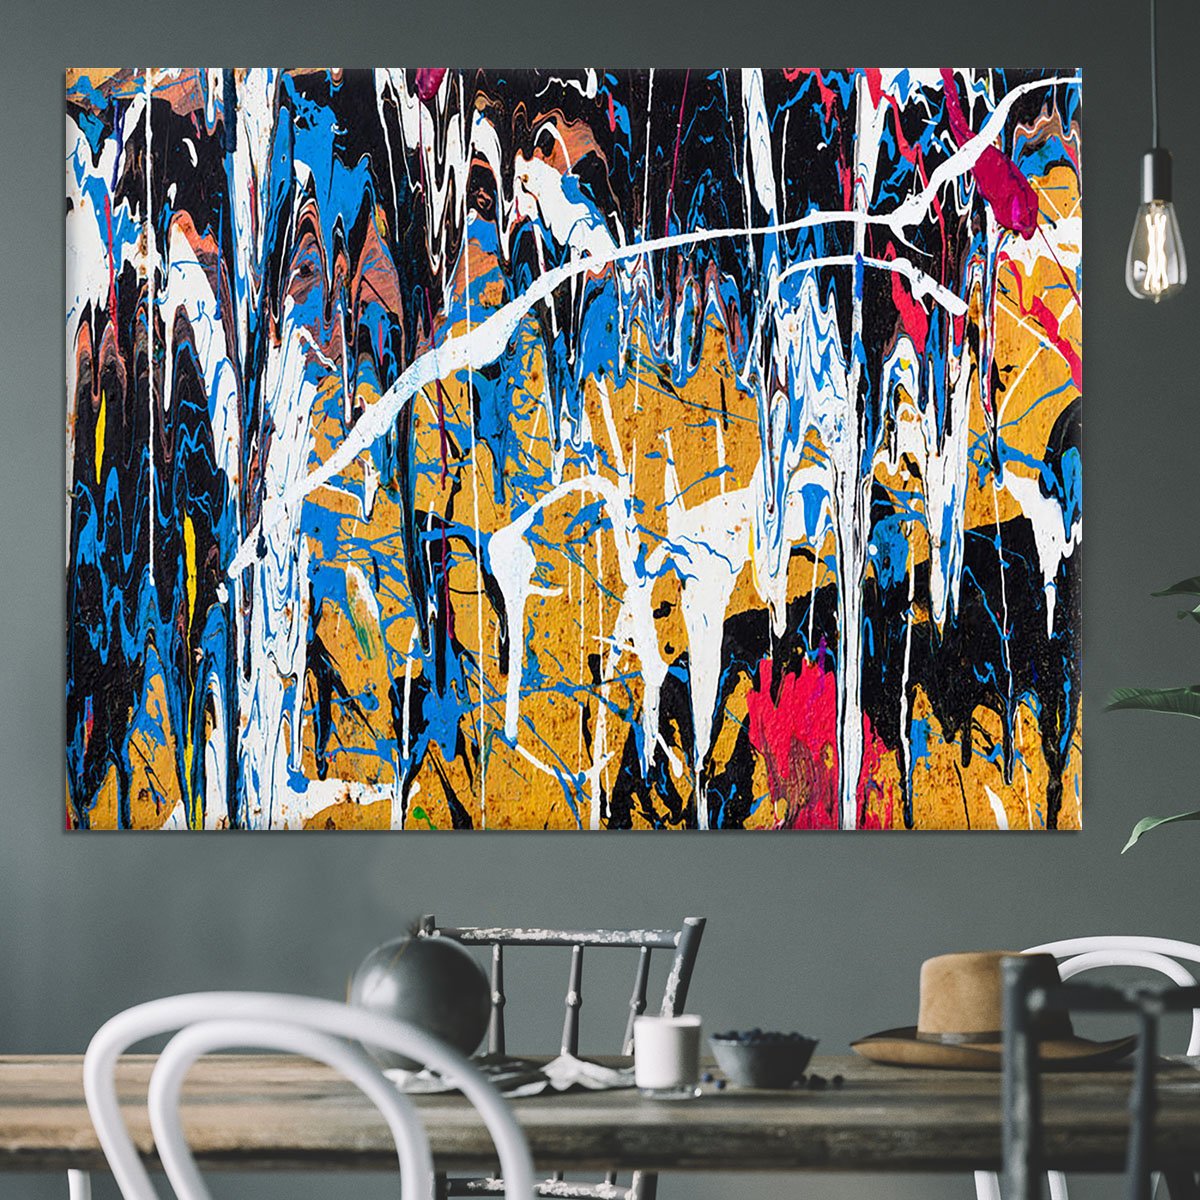 Dripping paint graffiti Canvas Print or Poster